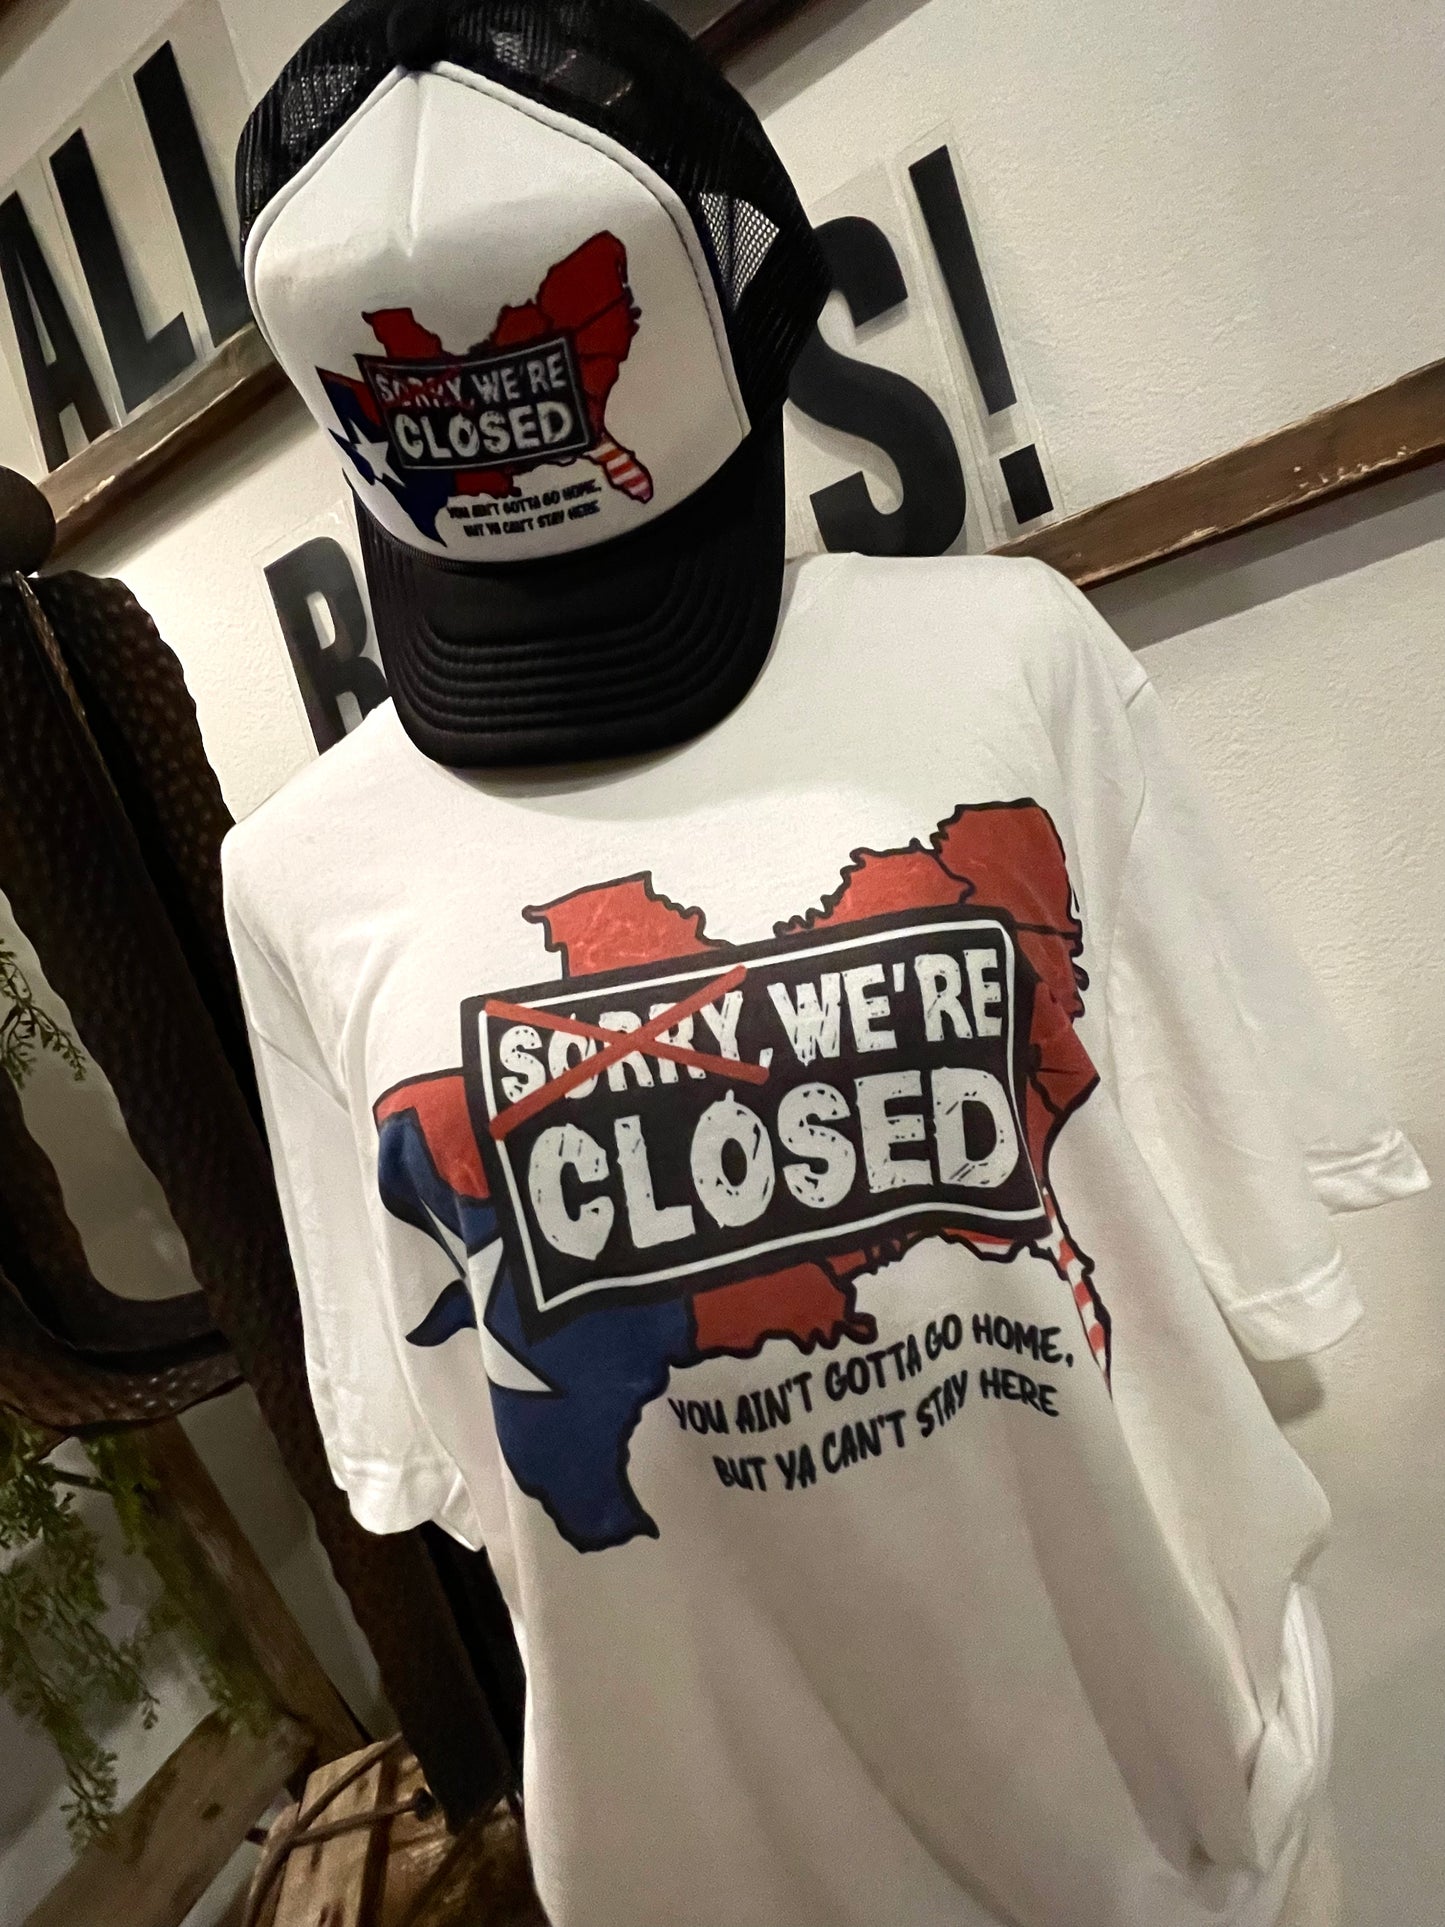 SORRY, WE'RE CLOSED TEE